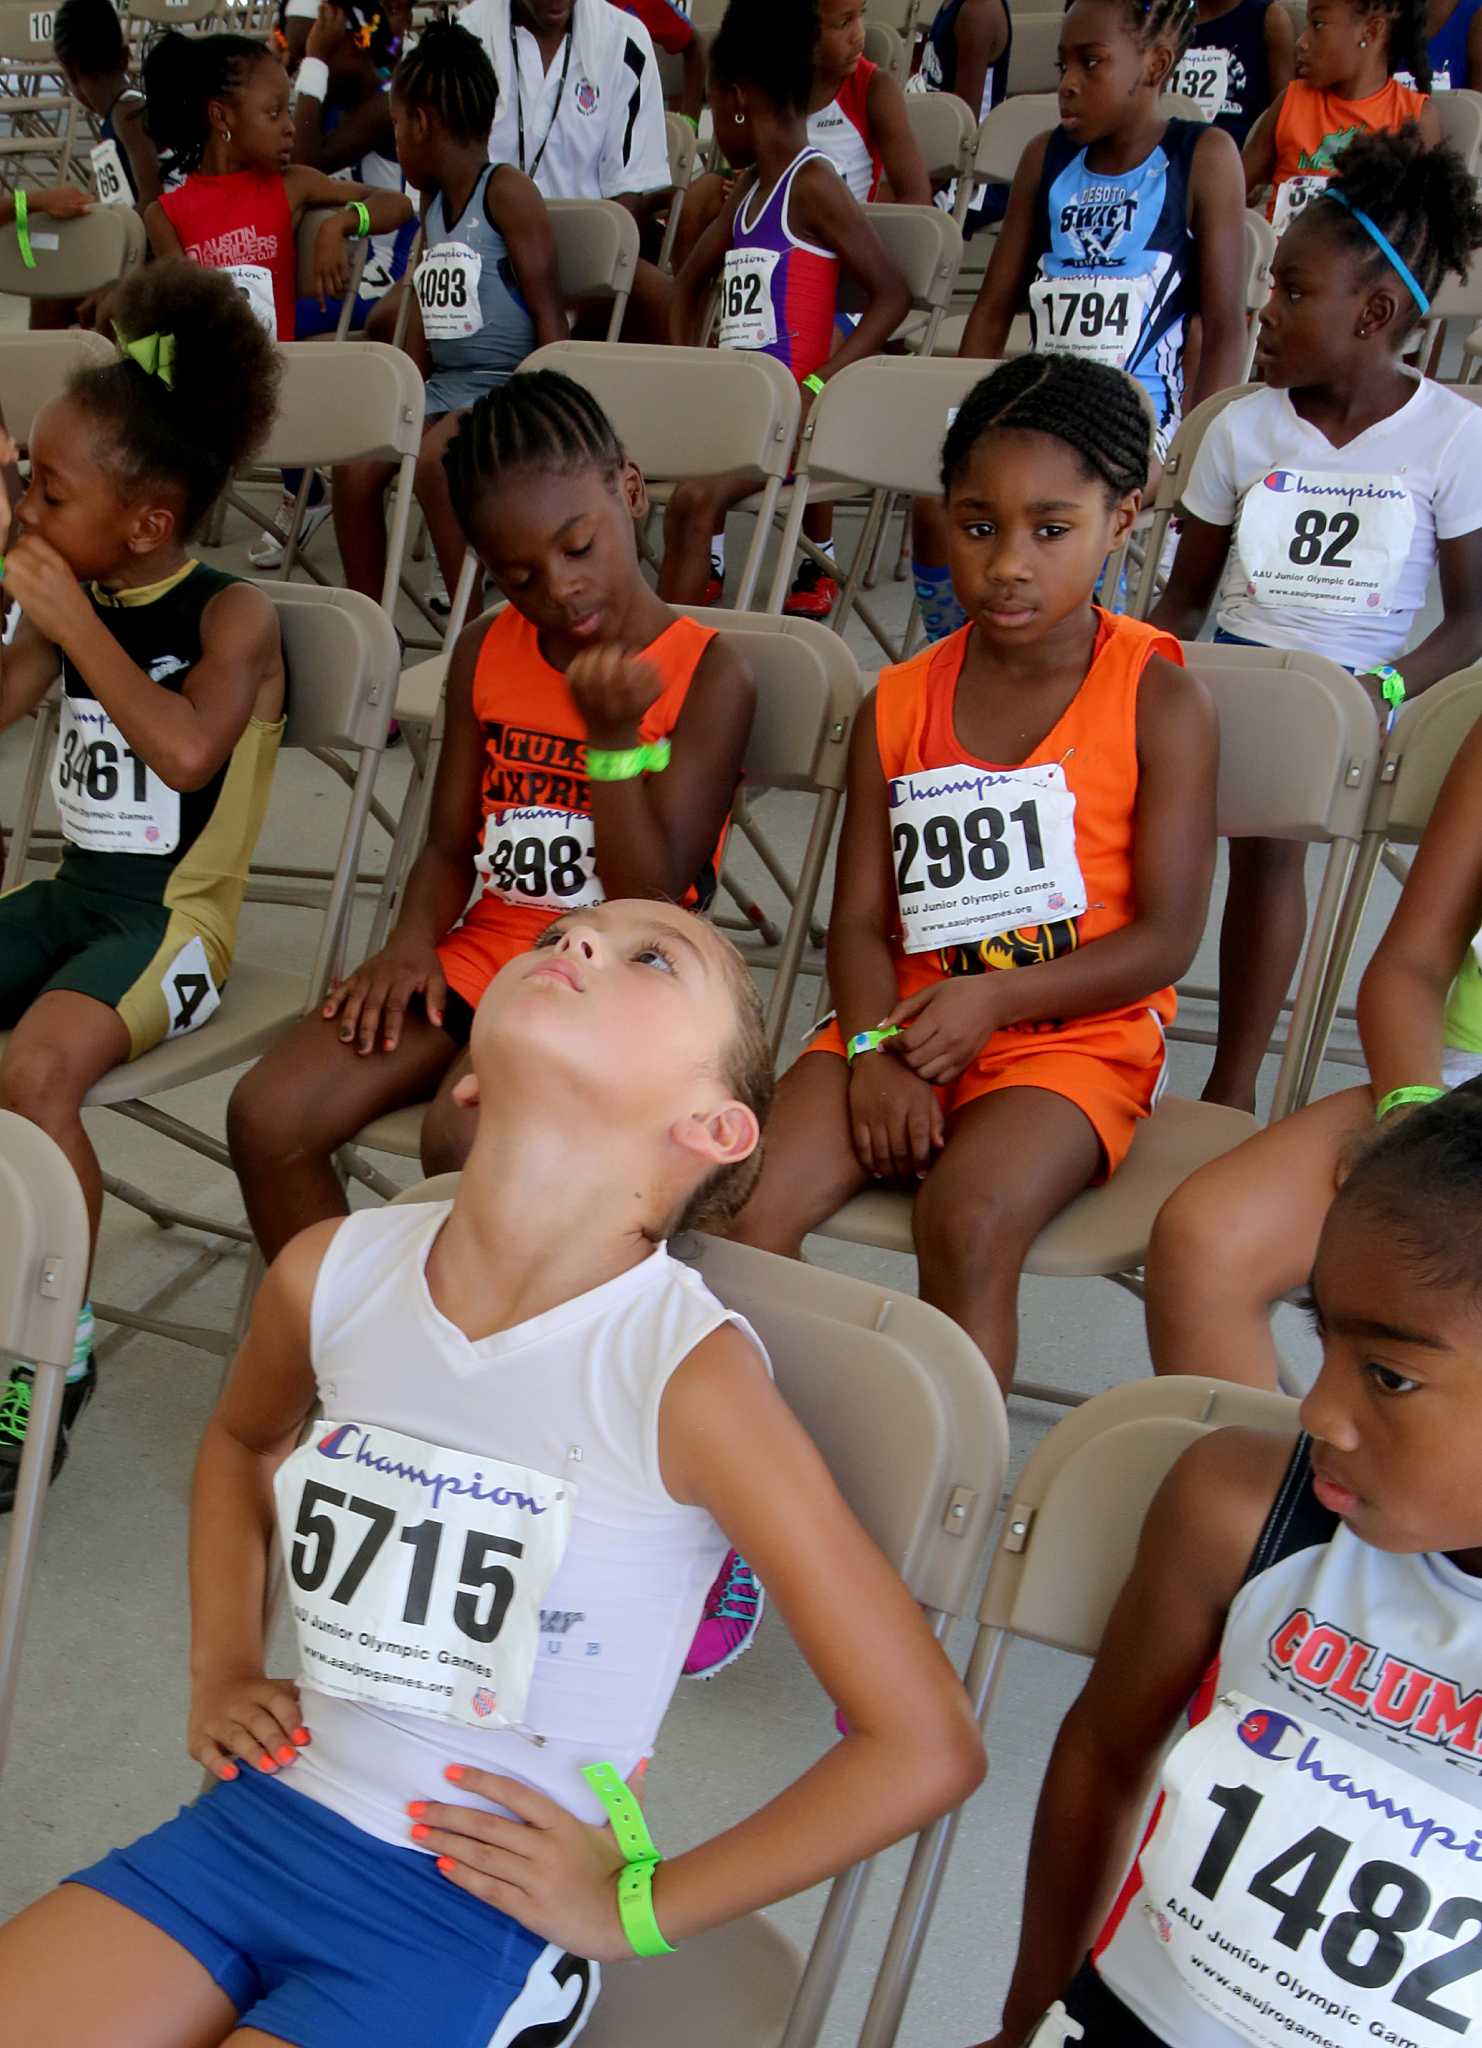 8-year-old track star has Olympic dreams photo